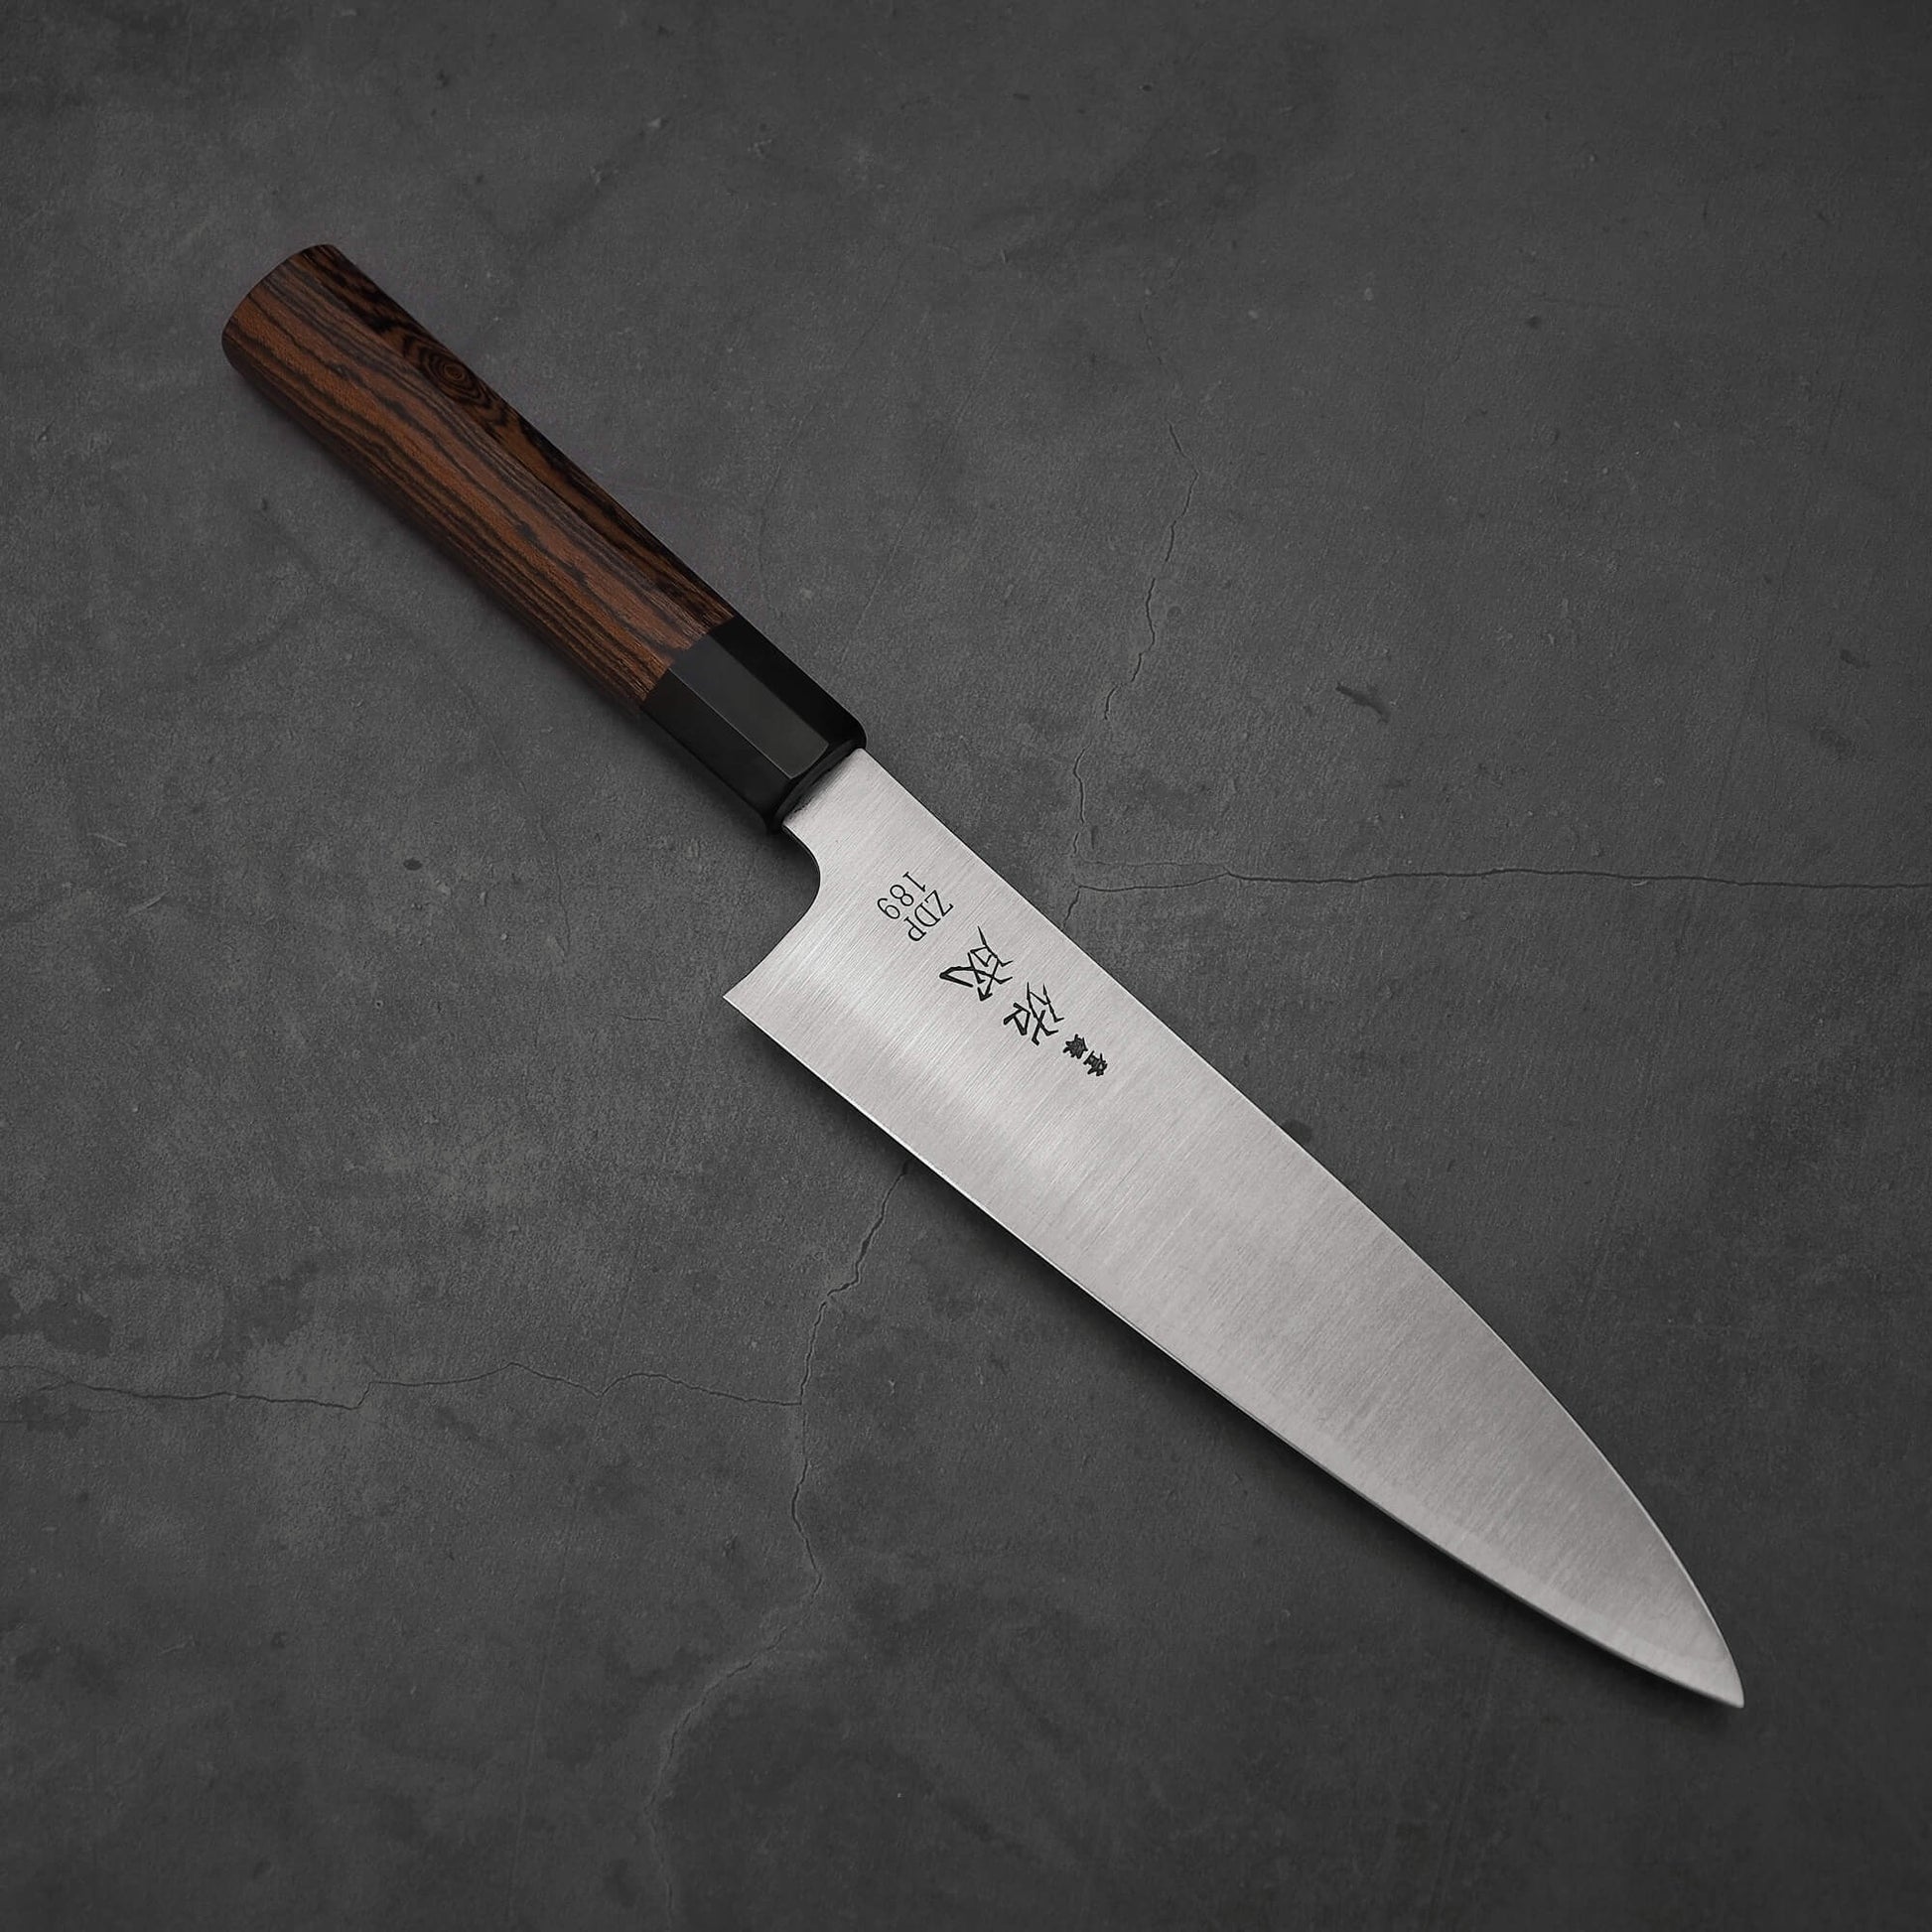 Top view of 210mm Sukenari ZDP189 gyuto knife where the pointed tip is facing towards the bottom right.